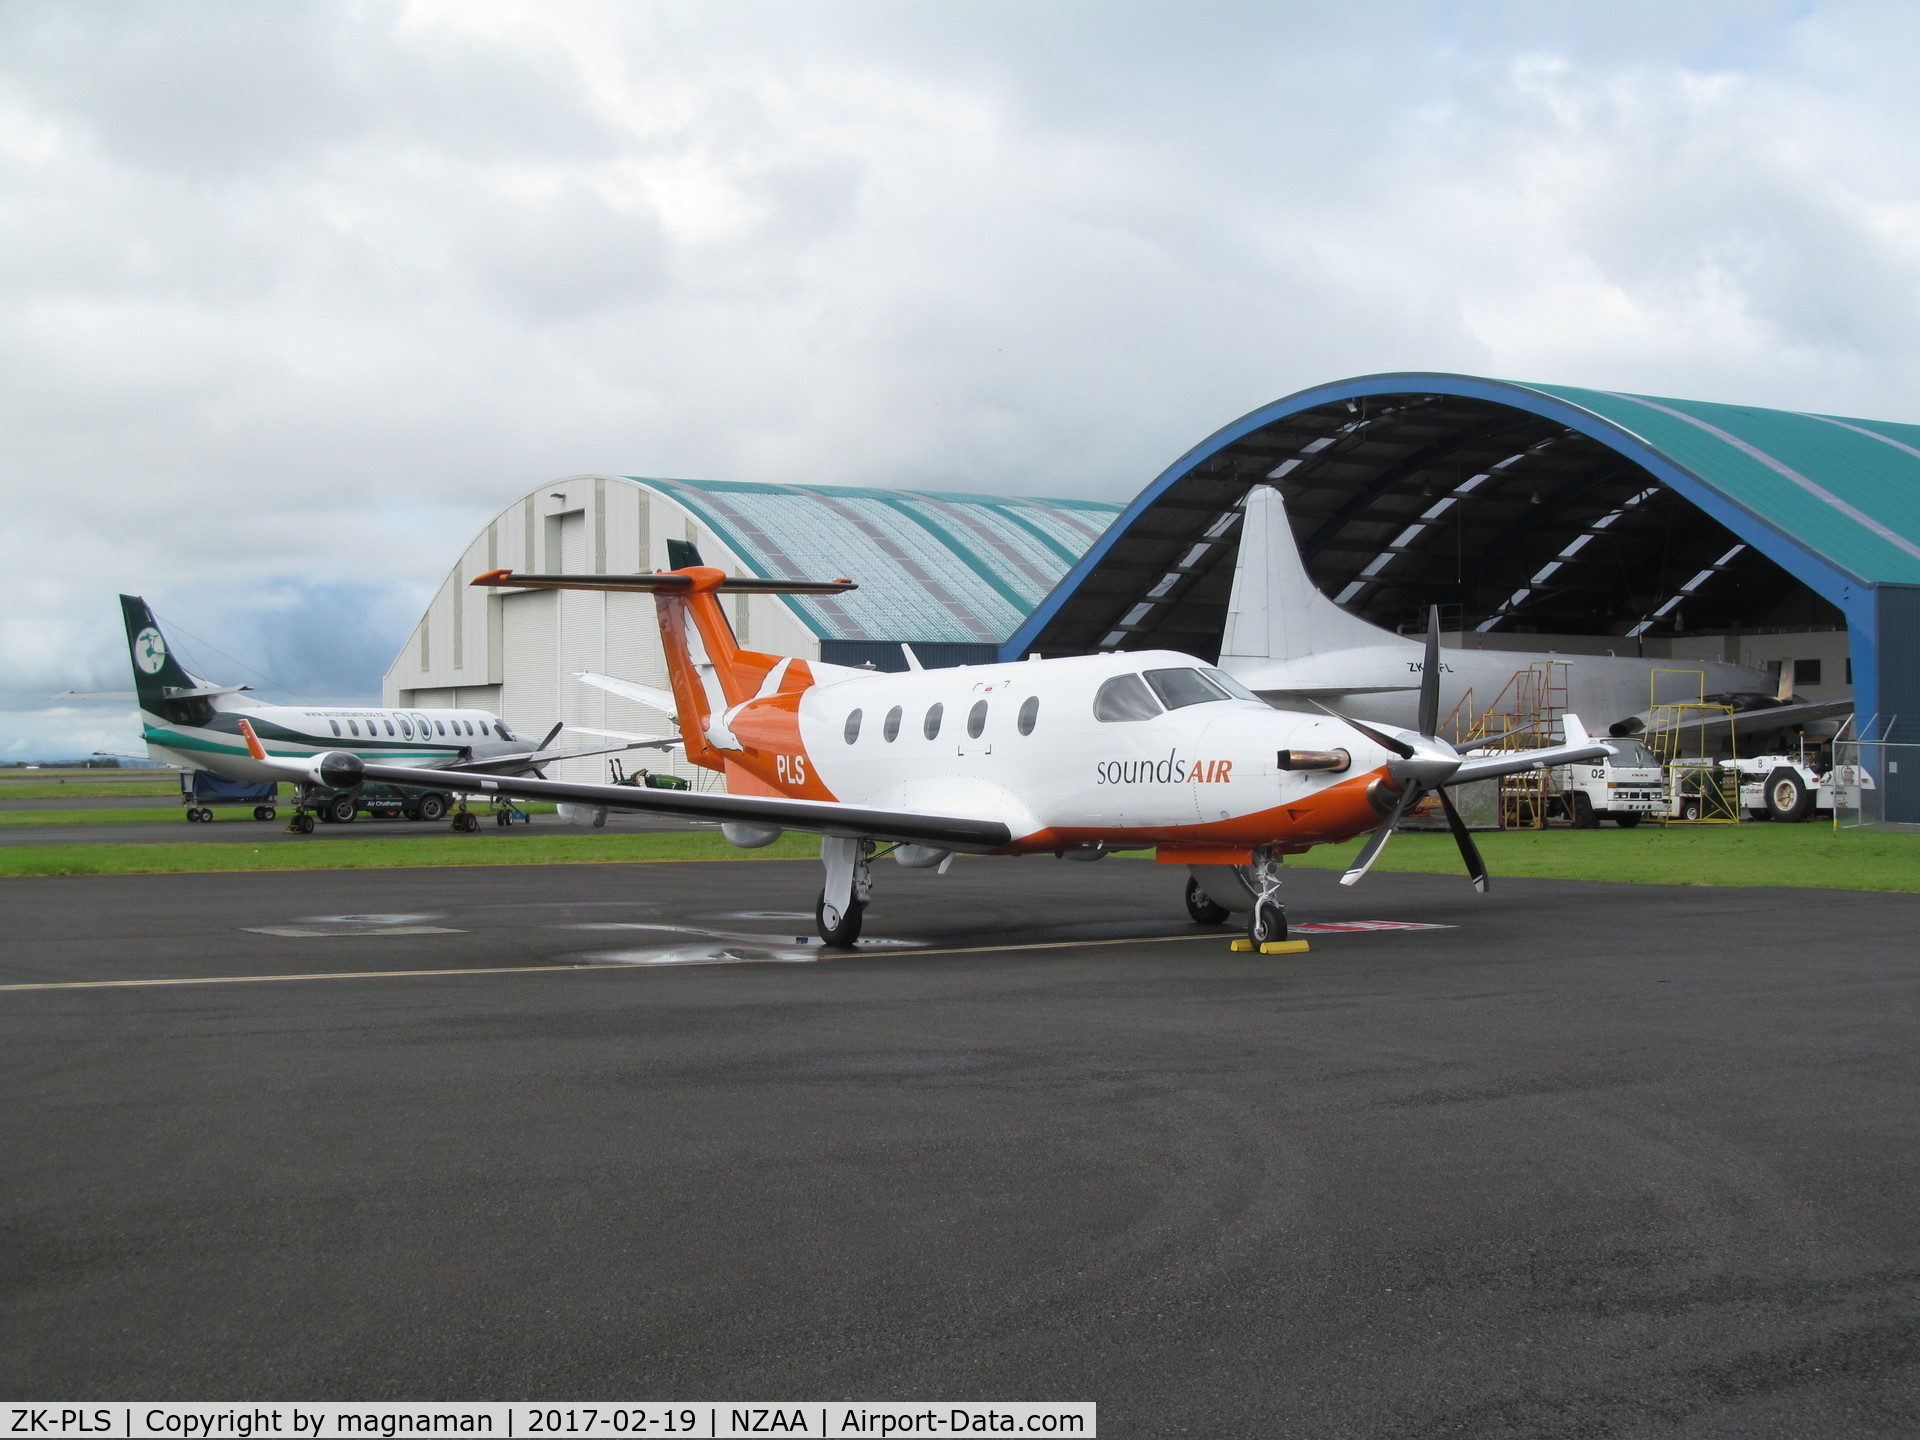 ZK-PLS, 2000 Pilatus PC-12/45 C/N 363, nice visitor from south island